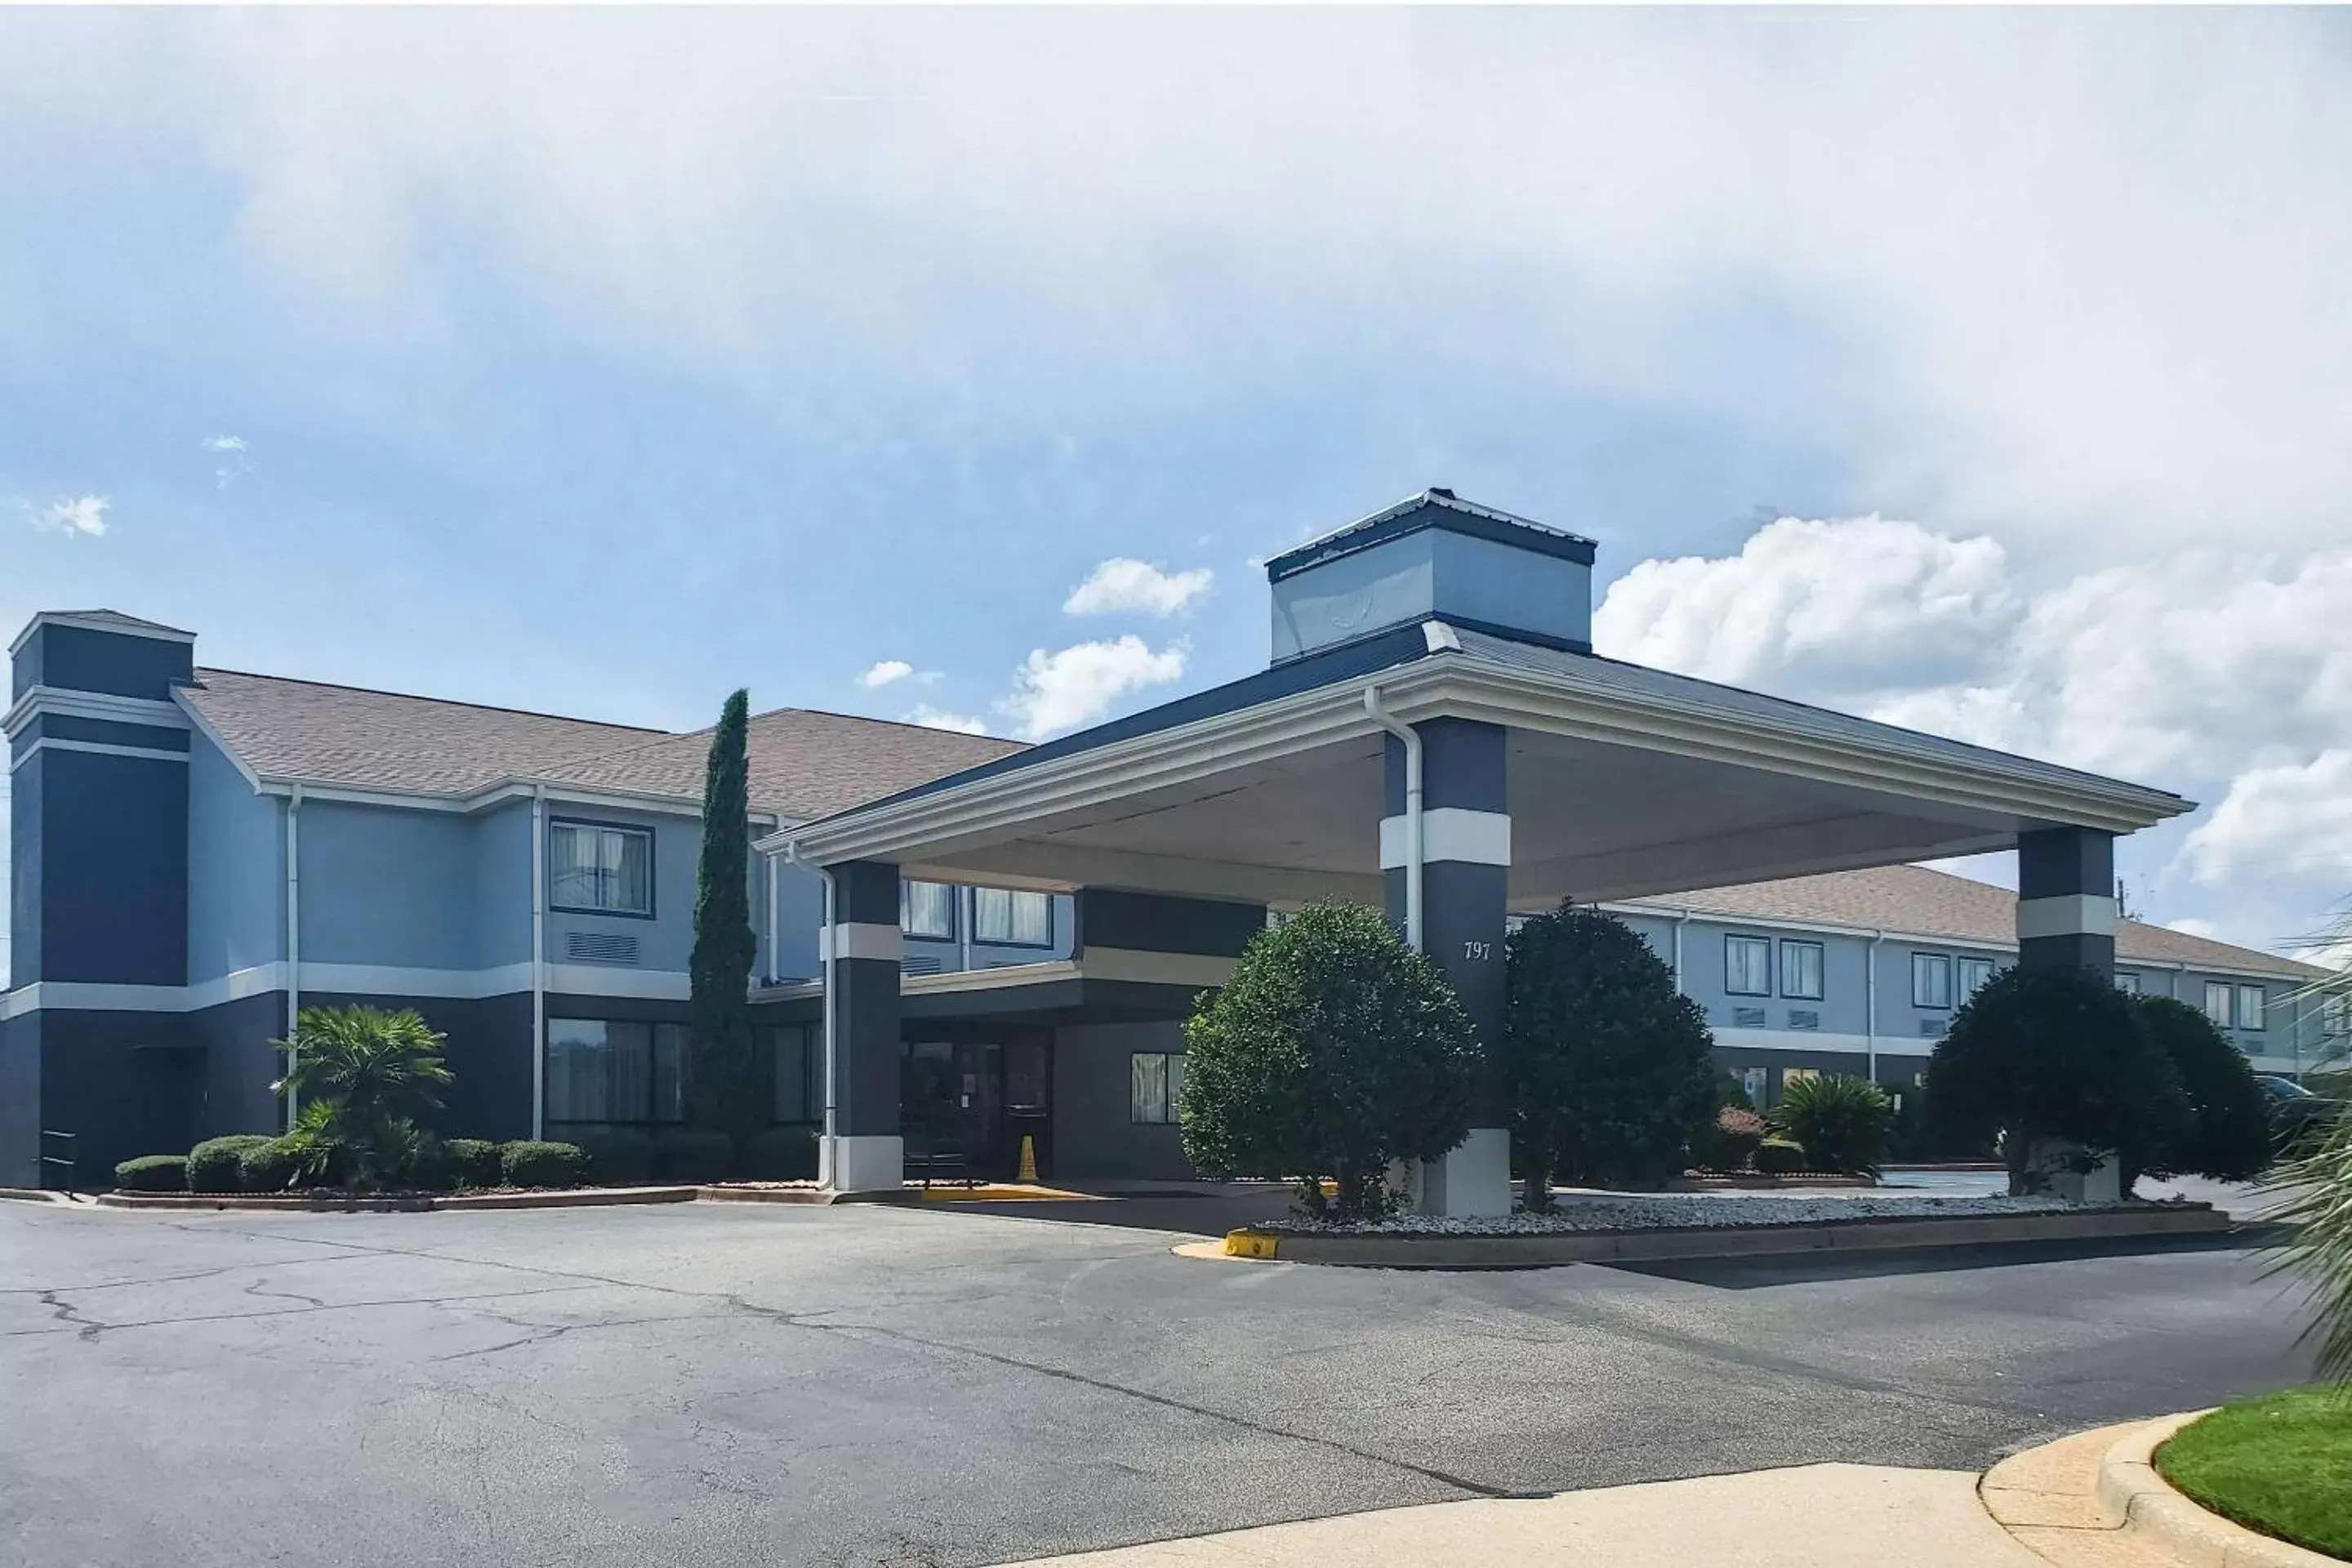 Property Building in Quality Inn Prattville I-65